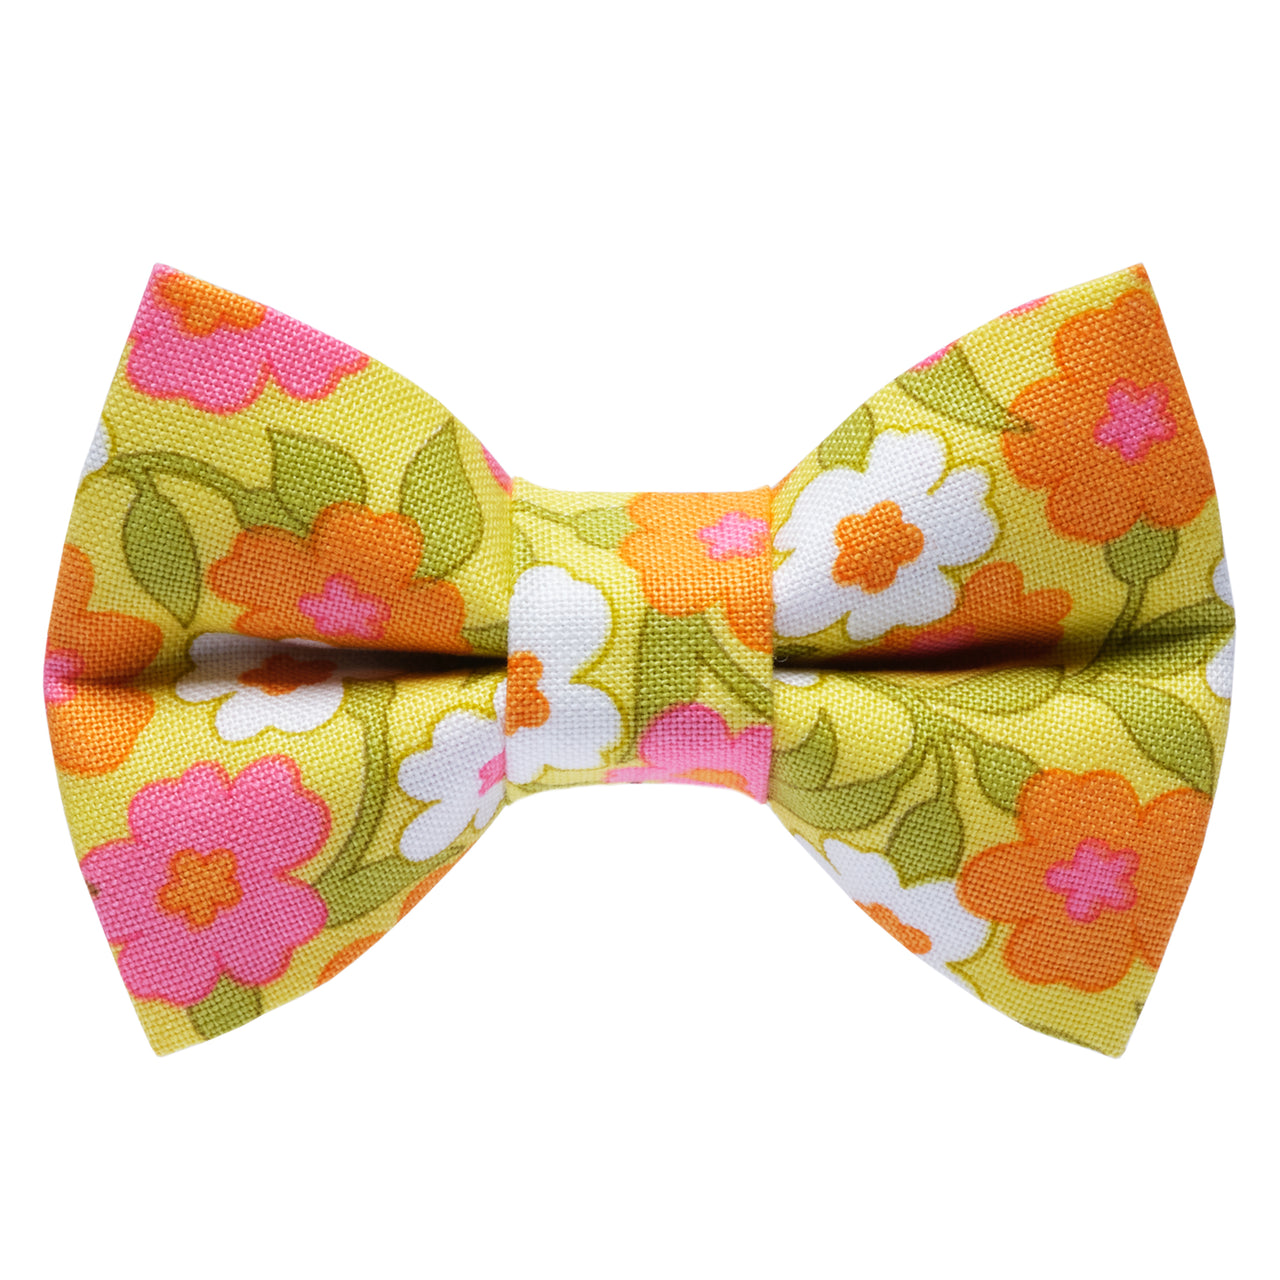 The Glamper - Cat / Dog Bow Tie